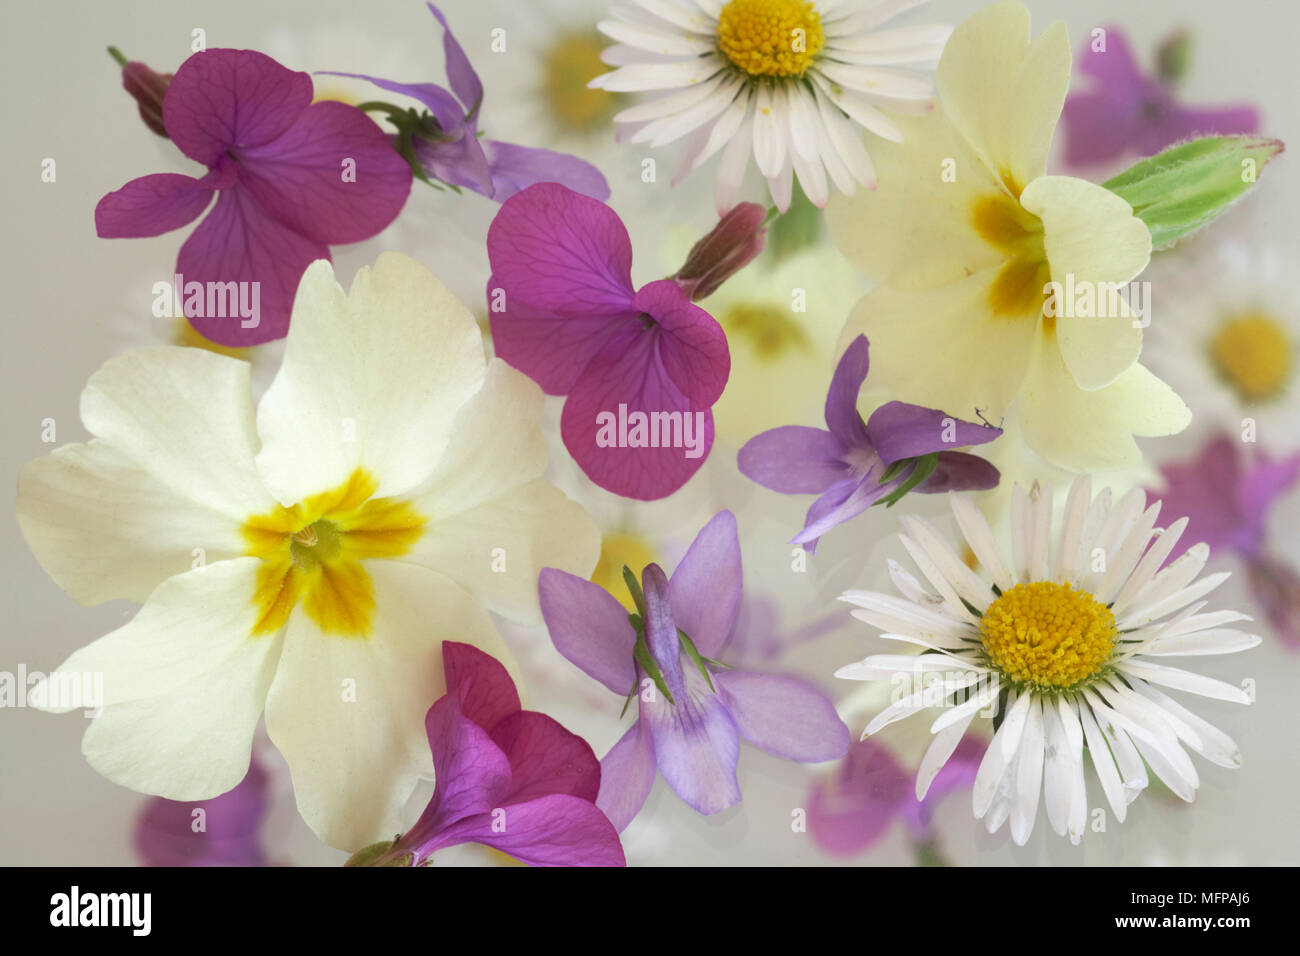 Medley of primroses, violets, daisies and lunaria flowers. Stock Photo